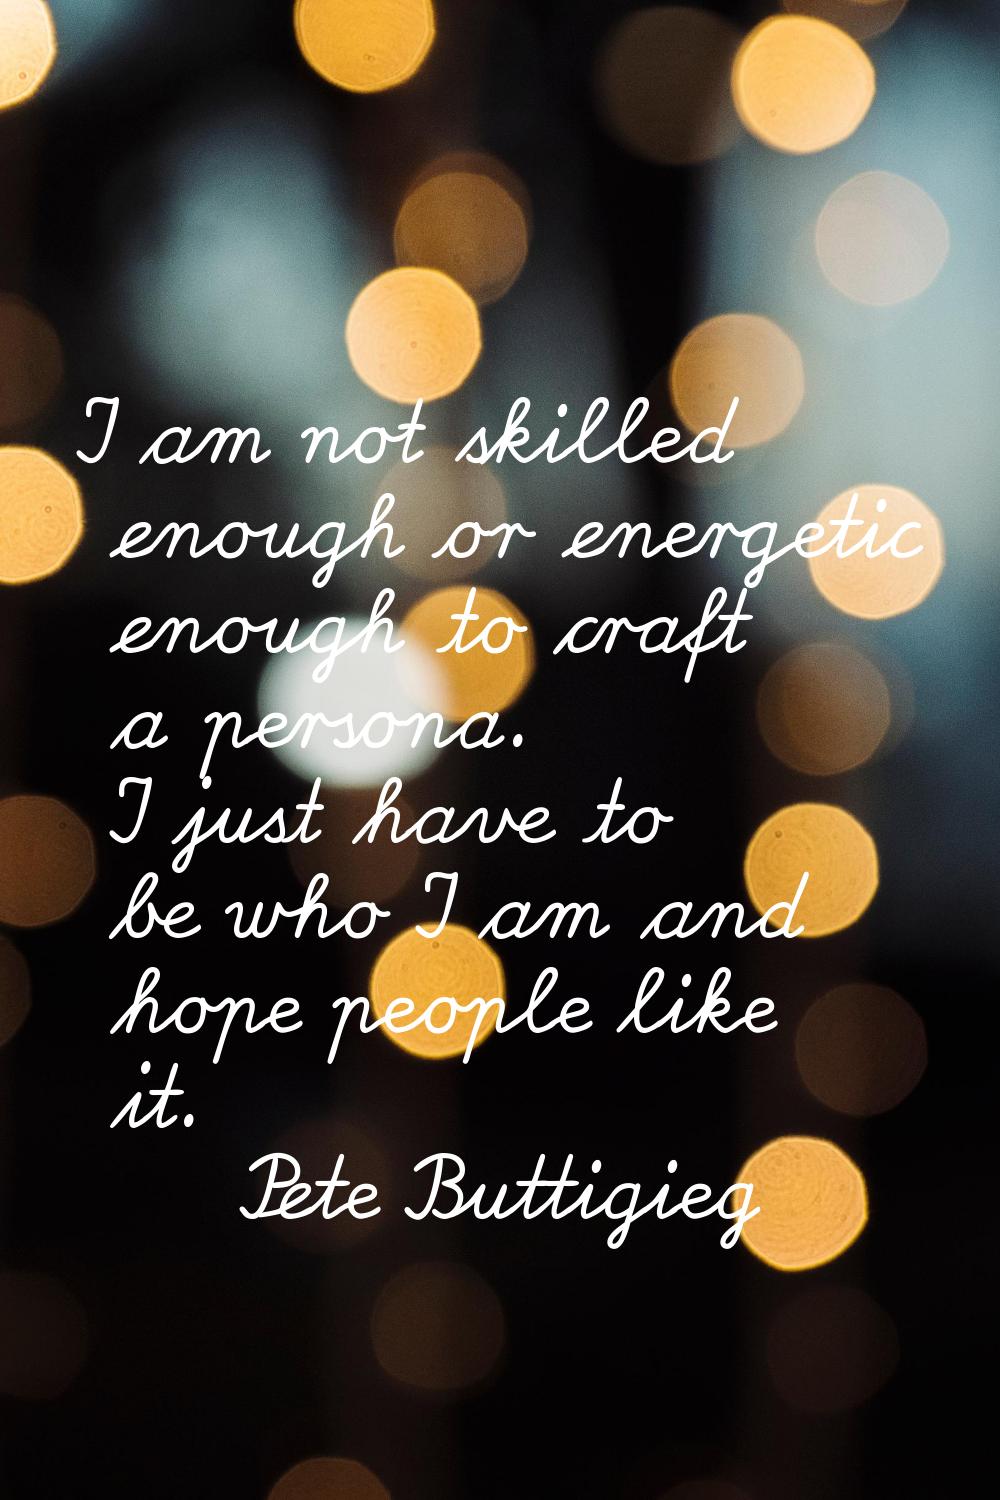 I am not skilled enough or energetic enough to craft a persona. I just have to be who I am and hope